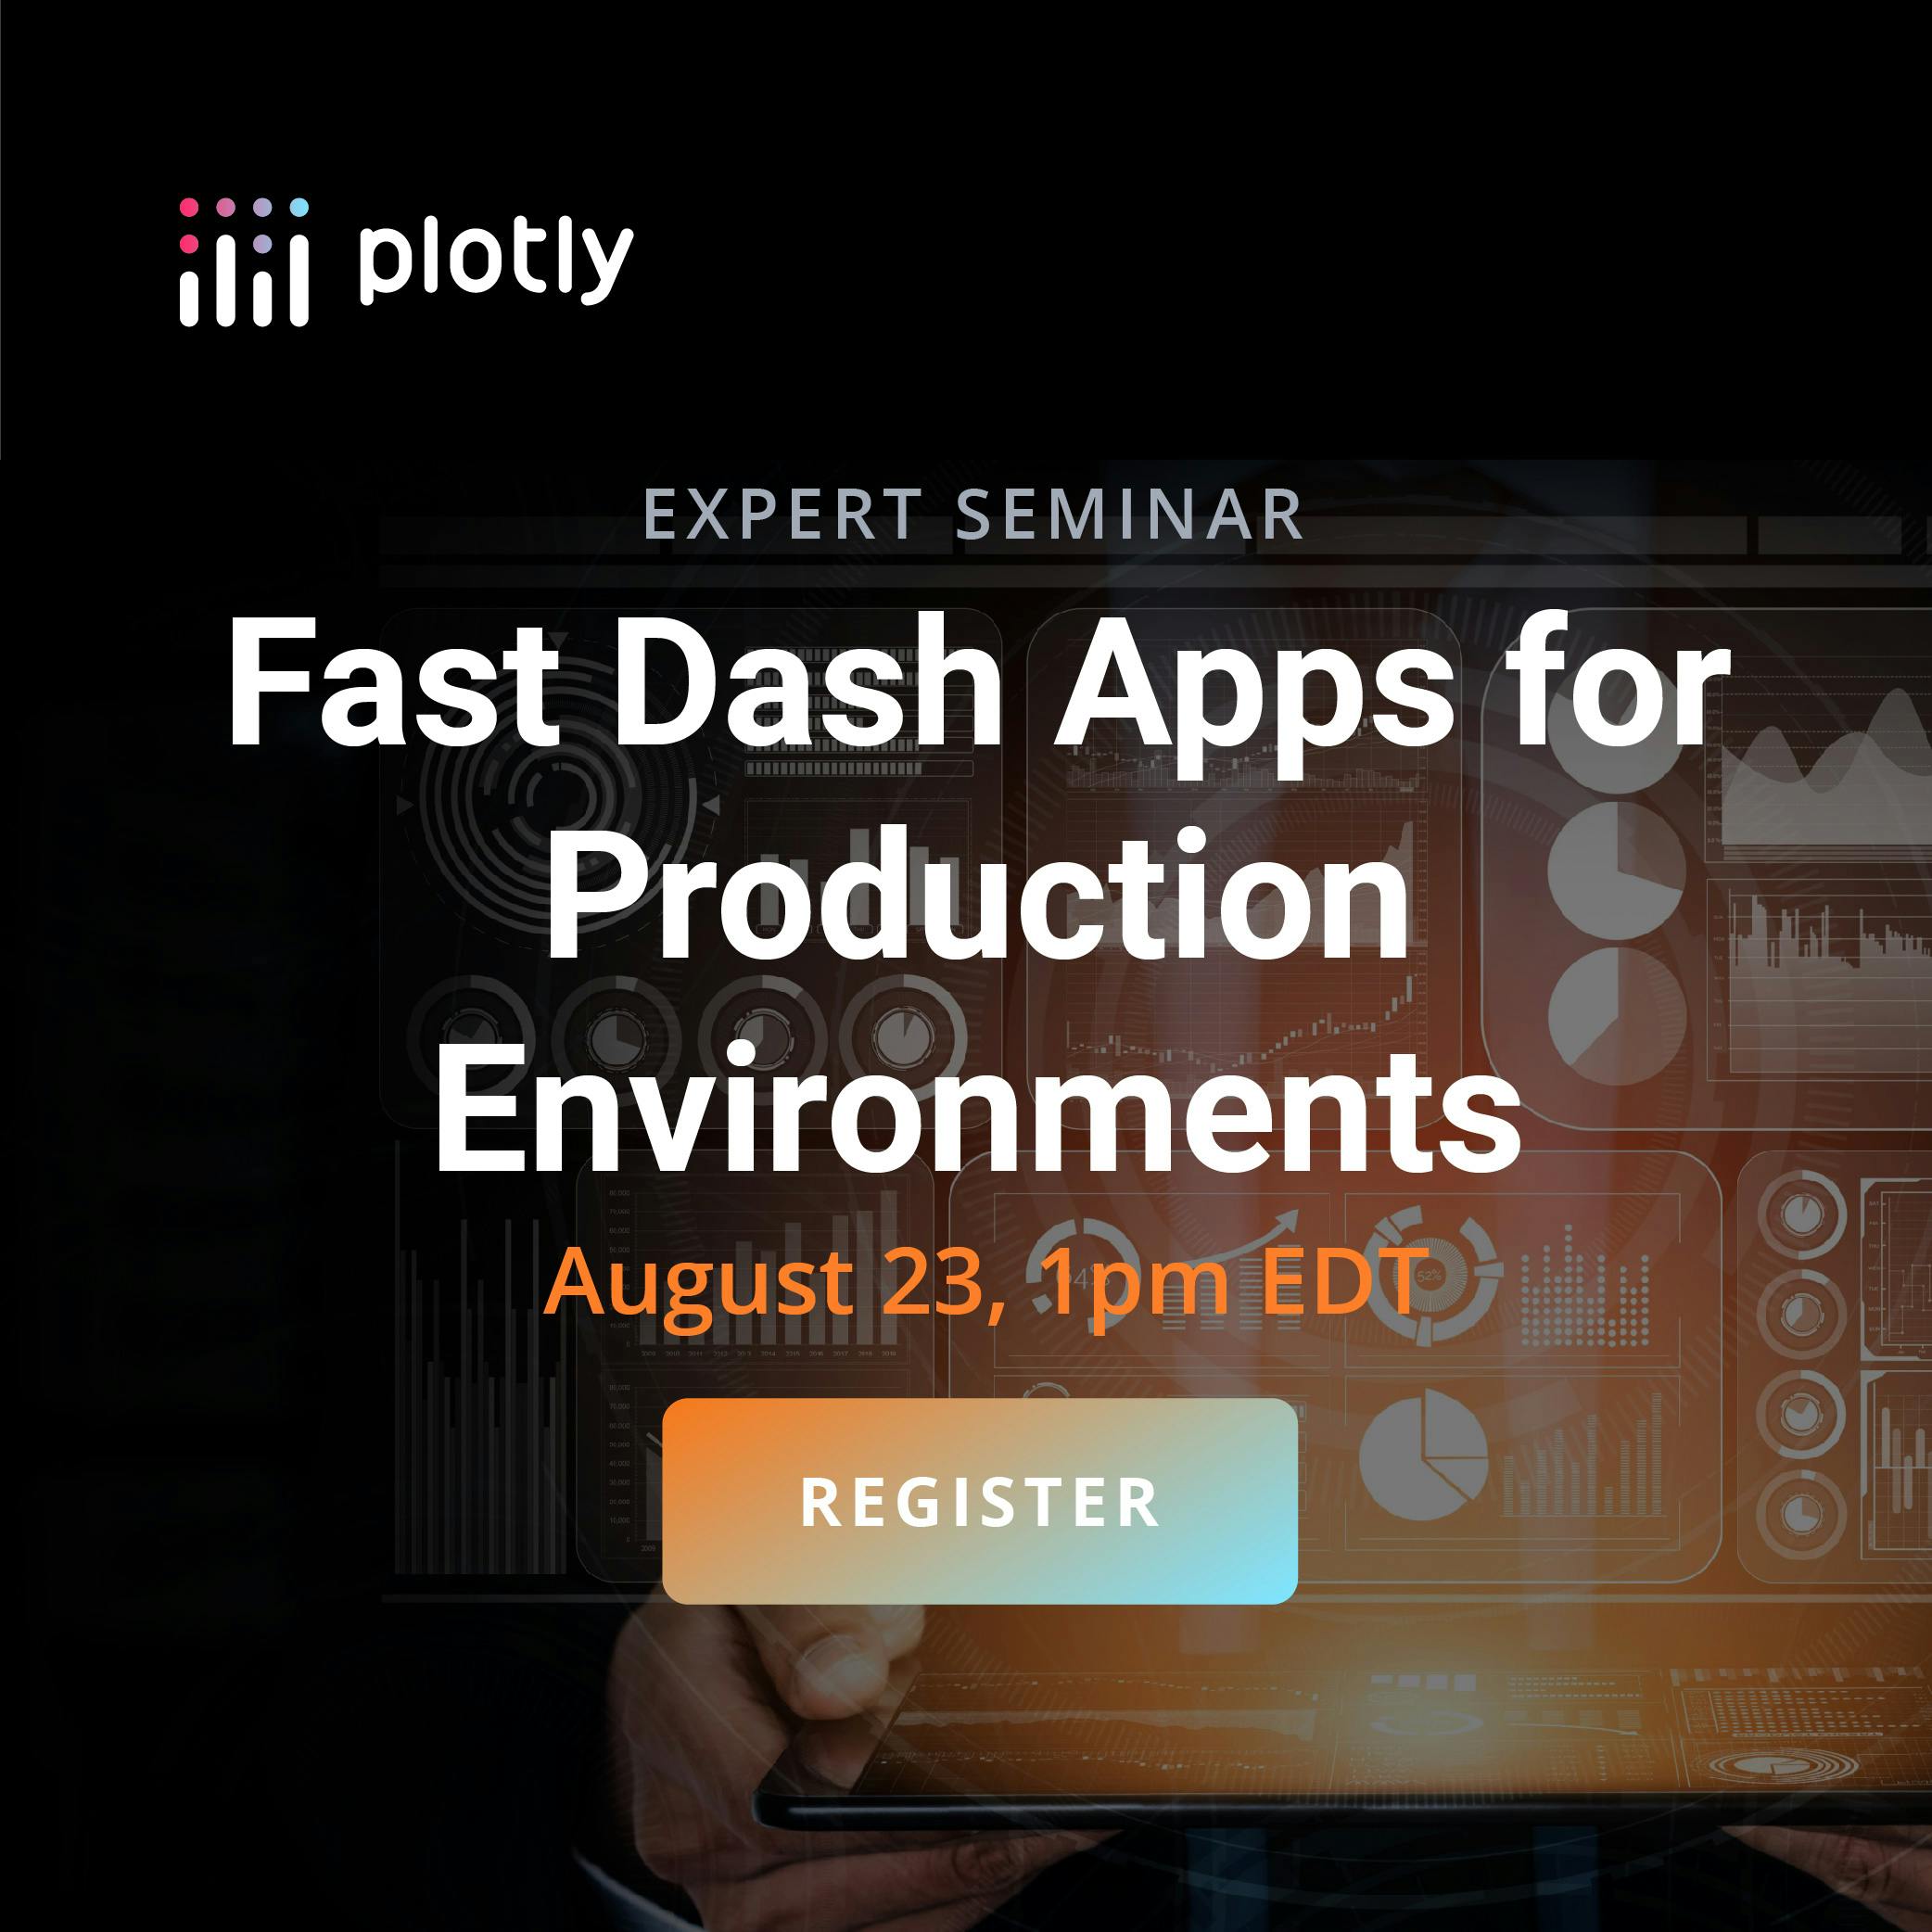 Register for the upcoming webinar: Fast Dash Apps for Production Environments.